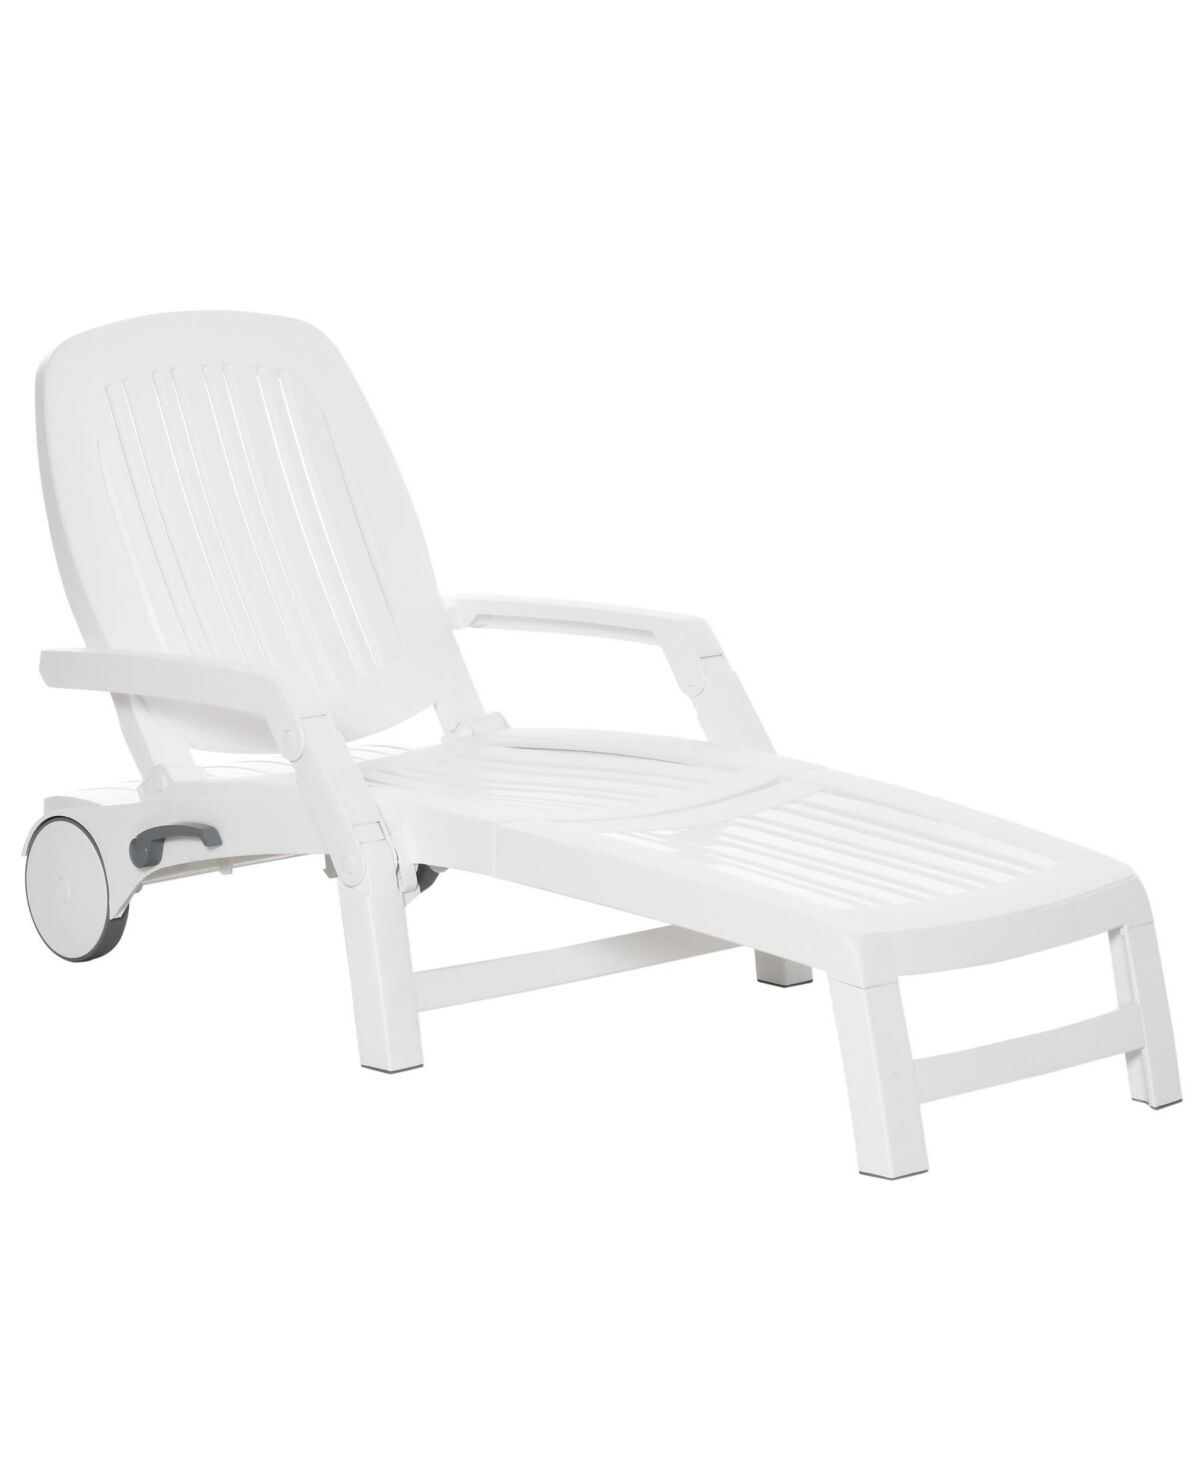 Outsunny Folding Chaise Lounge Chair on Wheels with Storage Box, Lightweight Plastic Sun Recliner with 5 Position Backrest for Beach & Pool, White - W